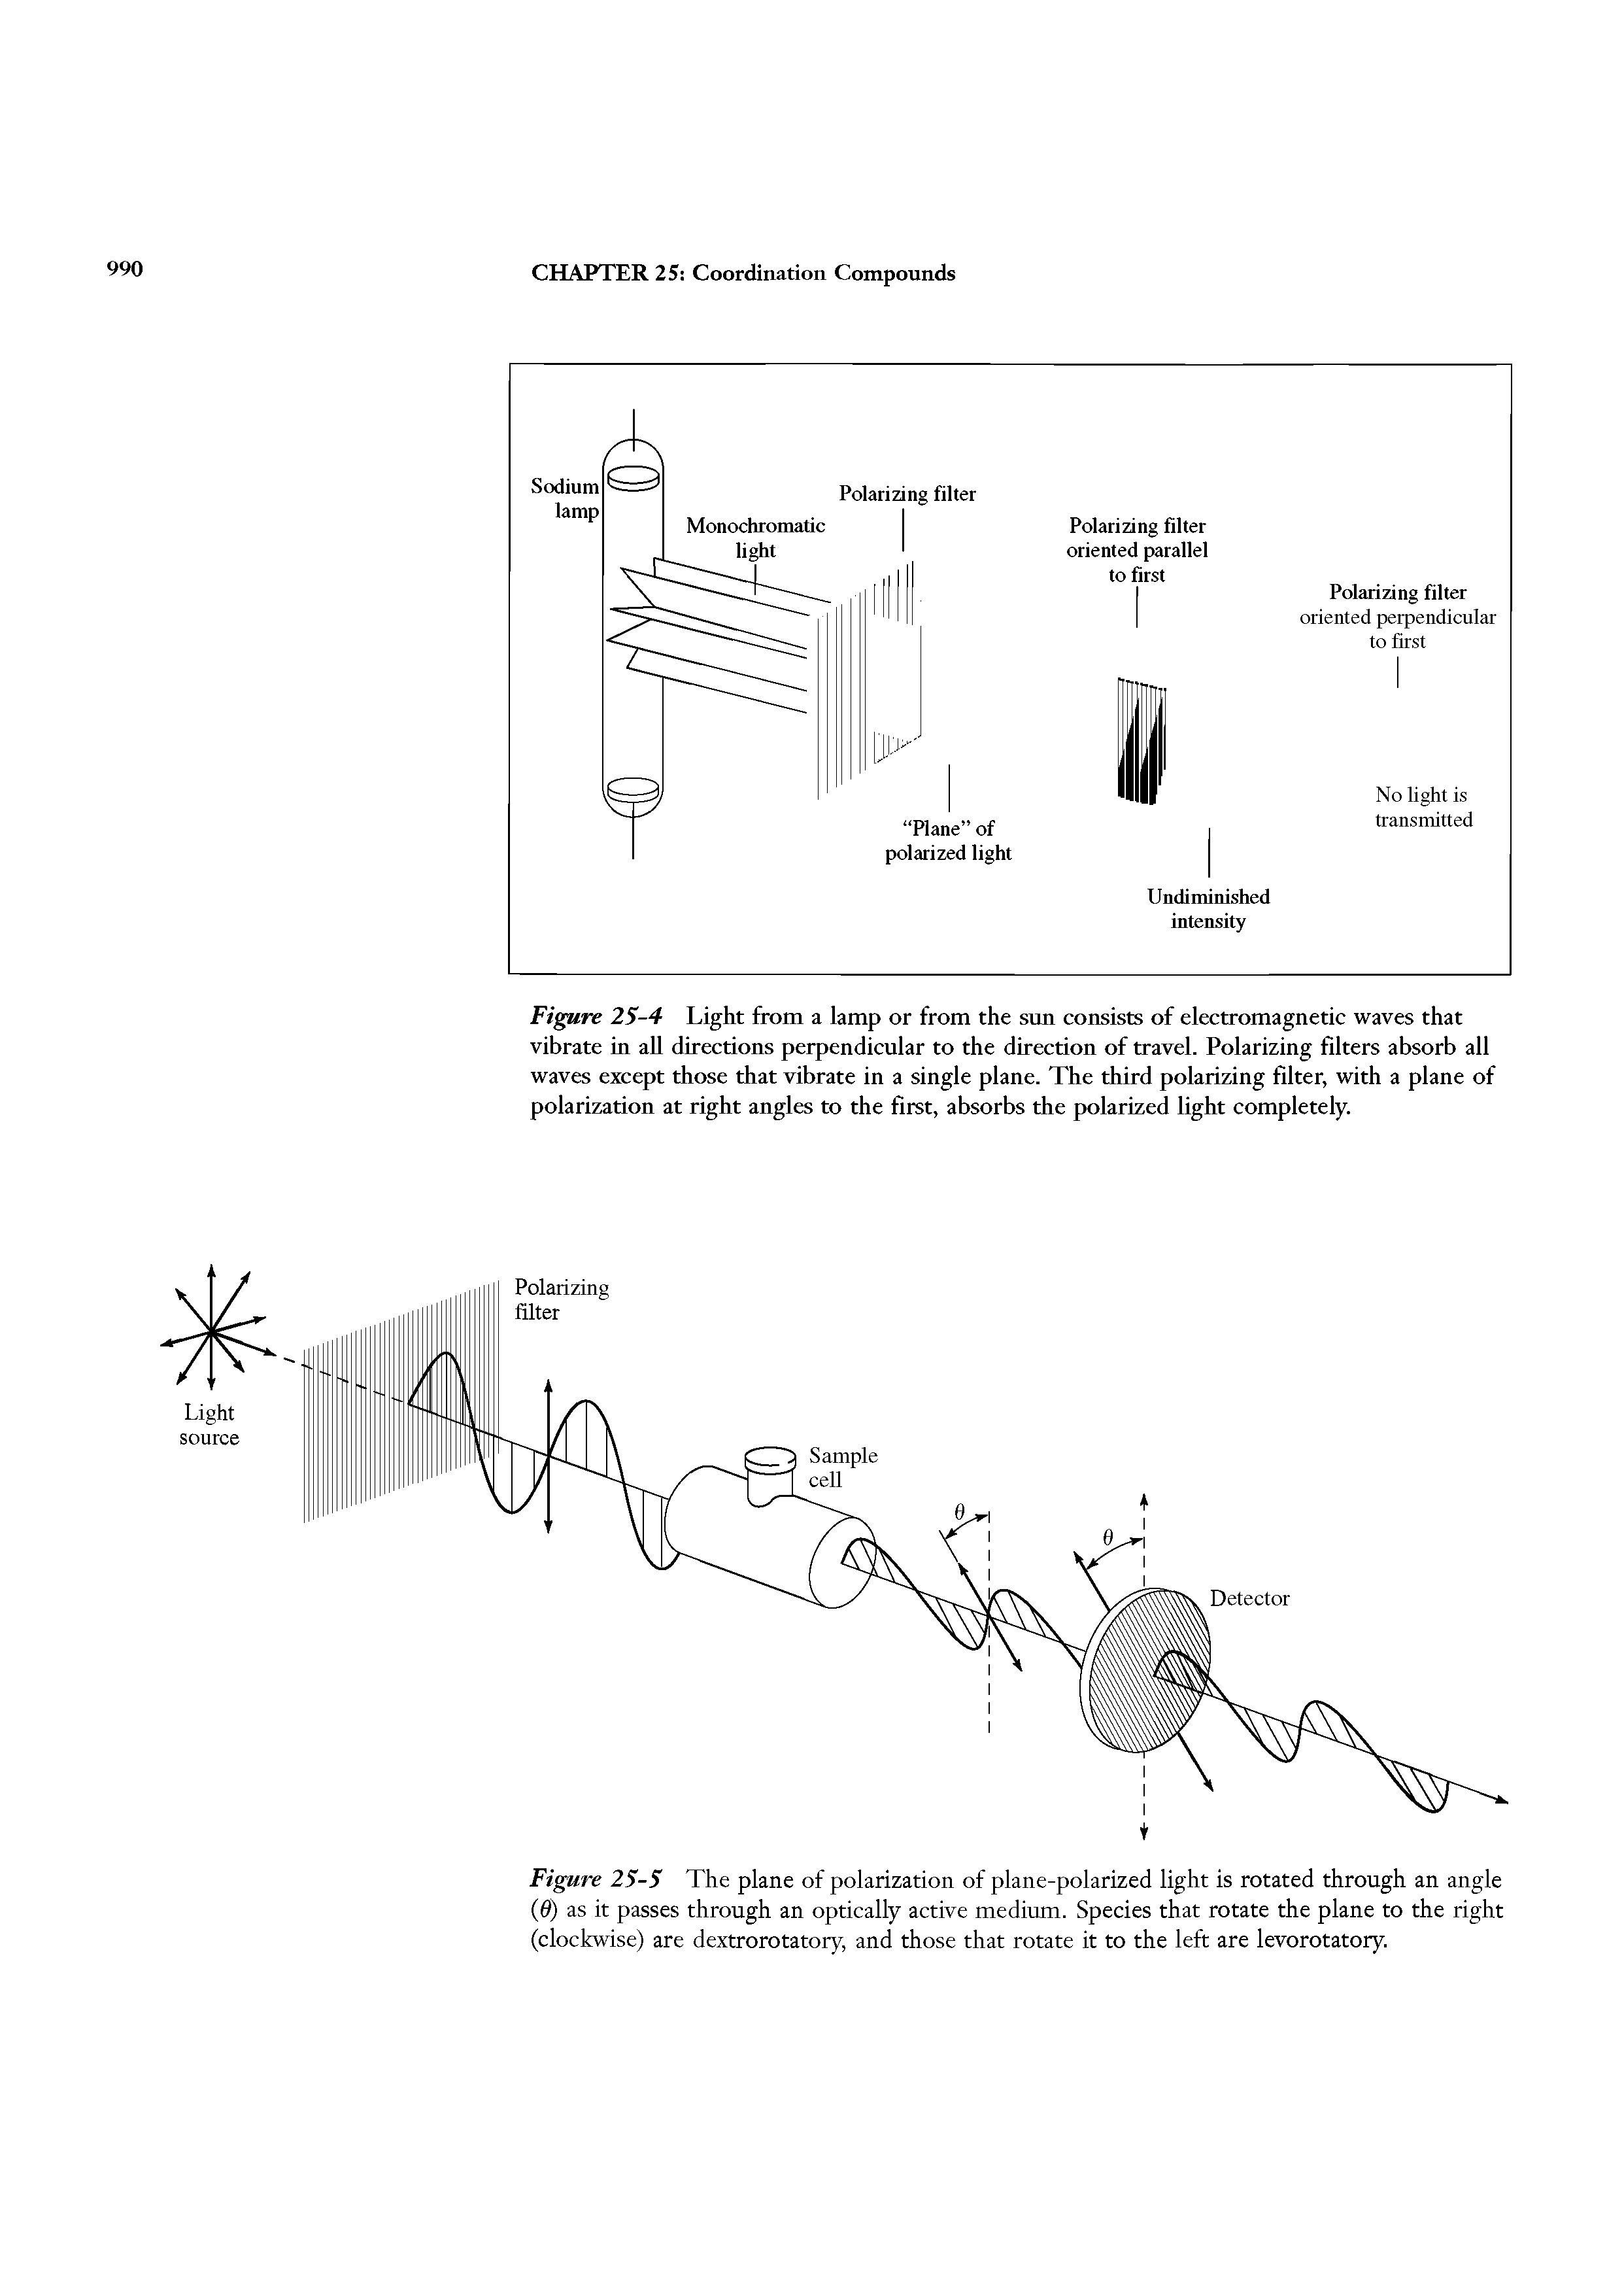 Figure 25-4 Light from a lamp or from the sun consists of electromagnetic waves that vibrate in all directions perpendicular to the direction of travel. Polarizing filters absorb all waves except those that vibrate in a single plane. The third polarizing filter, with a plane of polarization at right angles to the first, absorbs the polarized light completely.